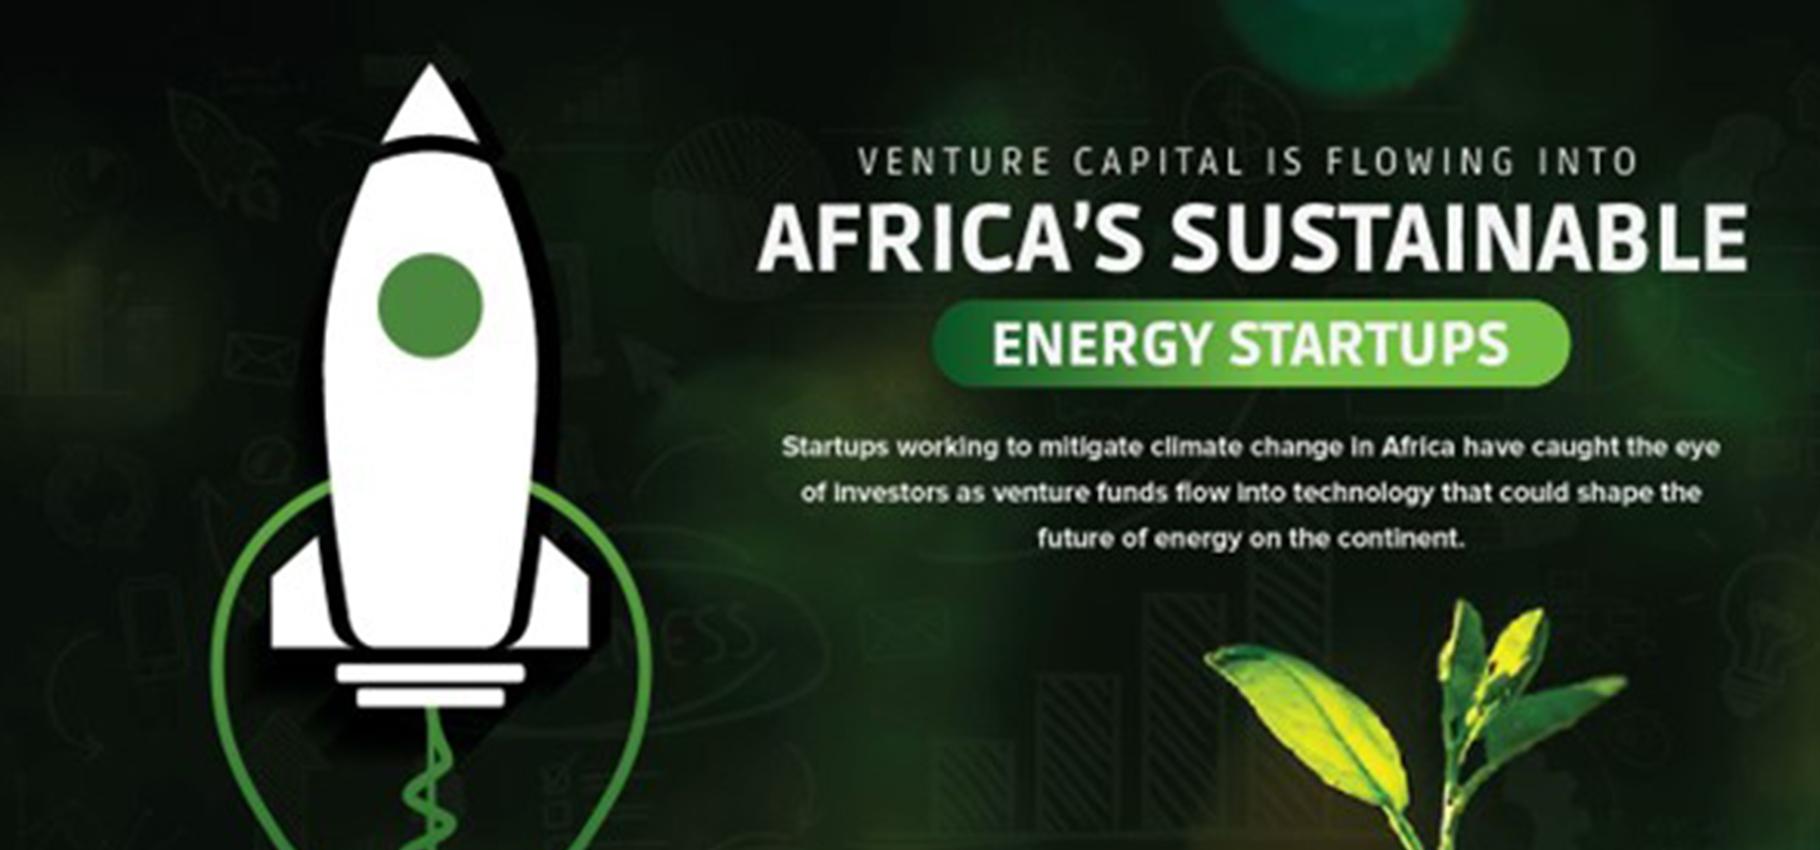 Green tech start-ups in Africa are attracting investor interest